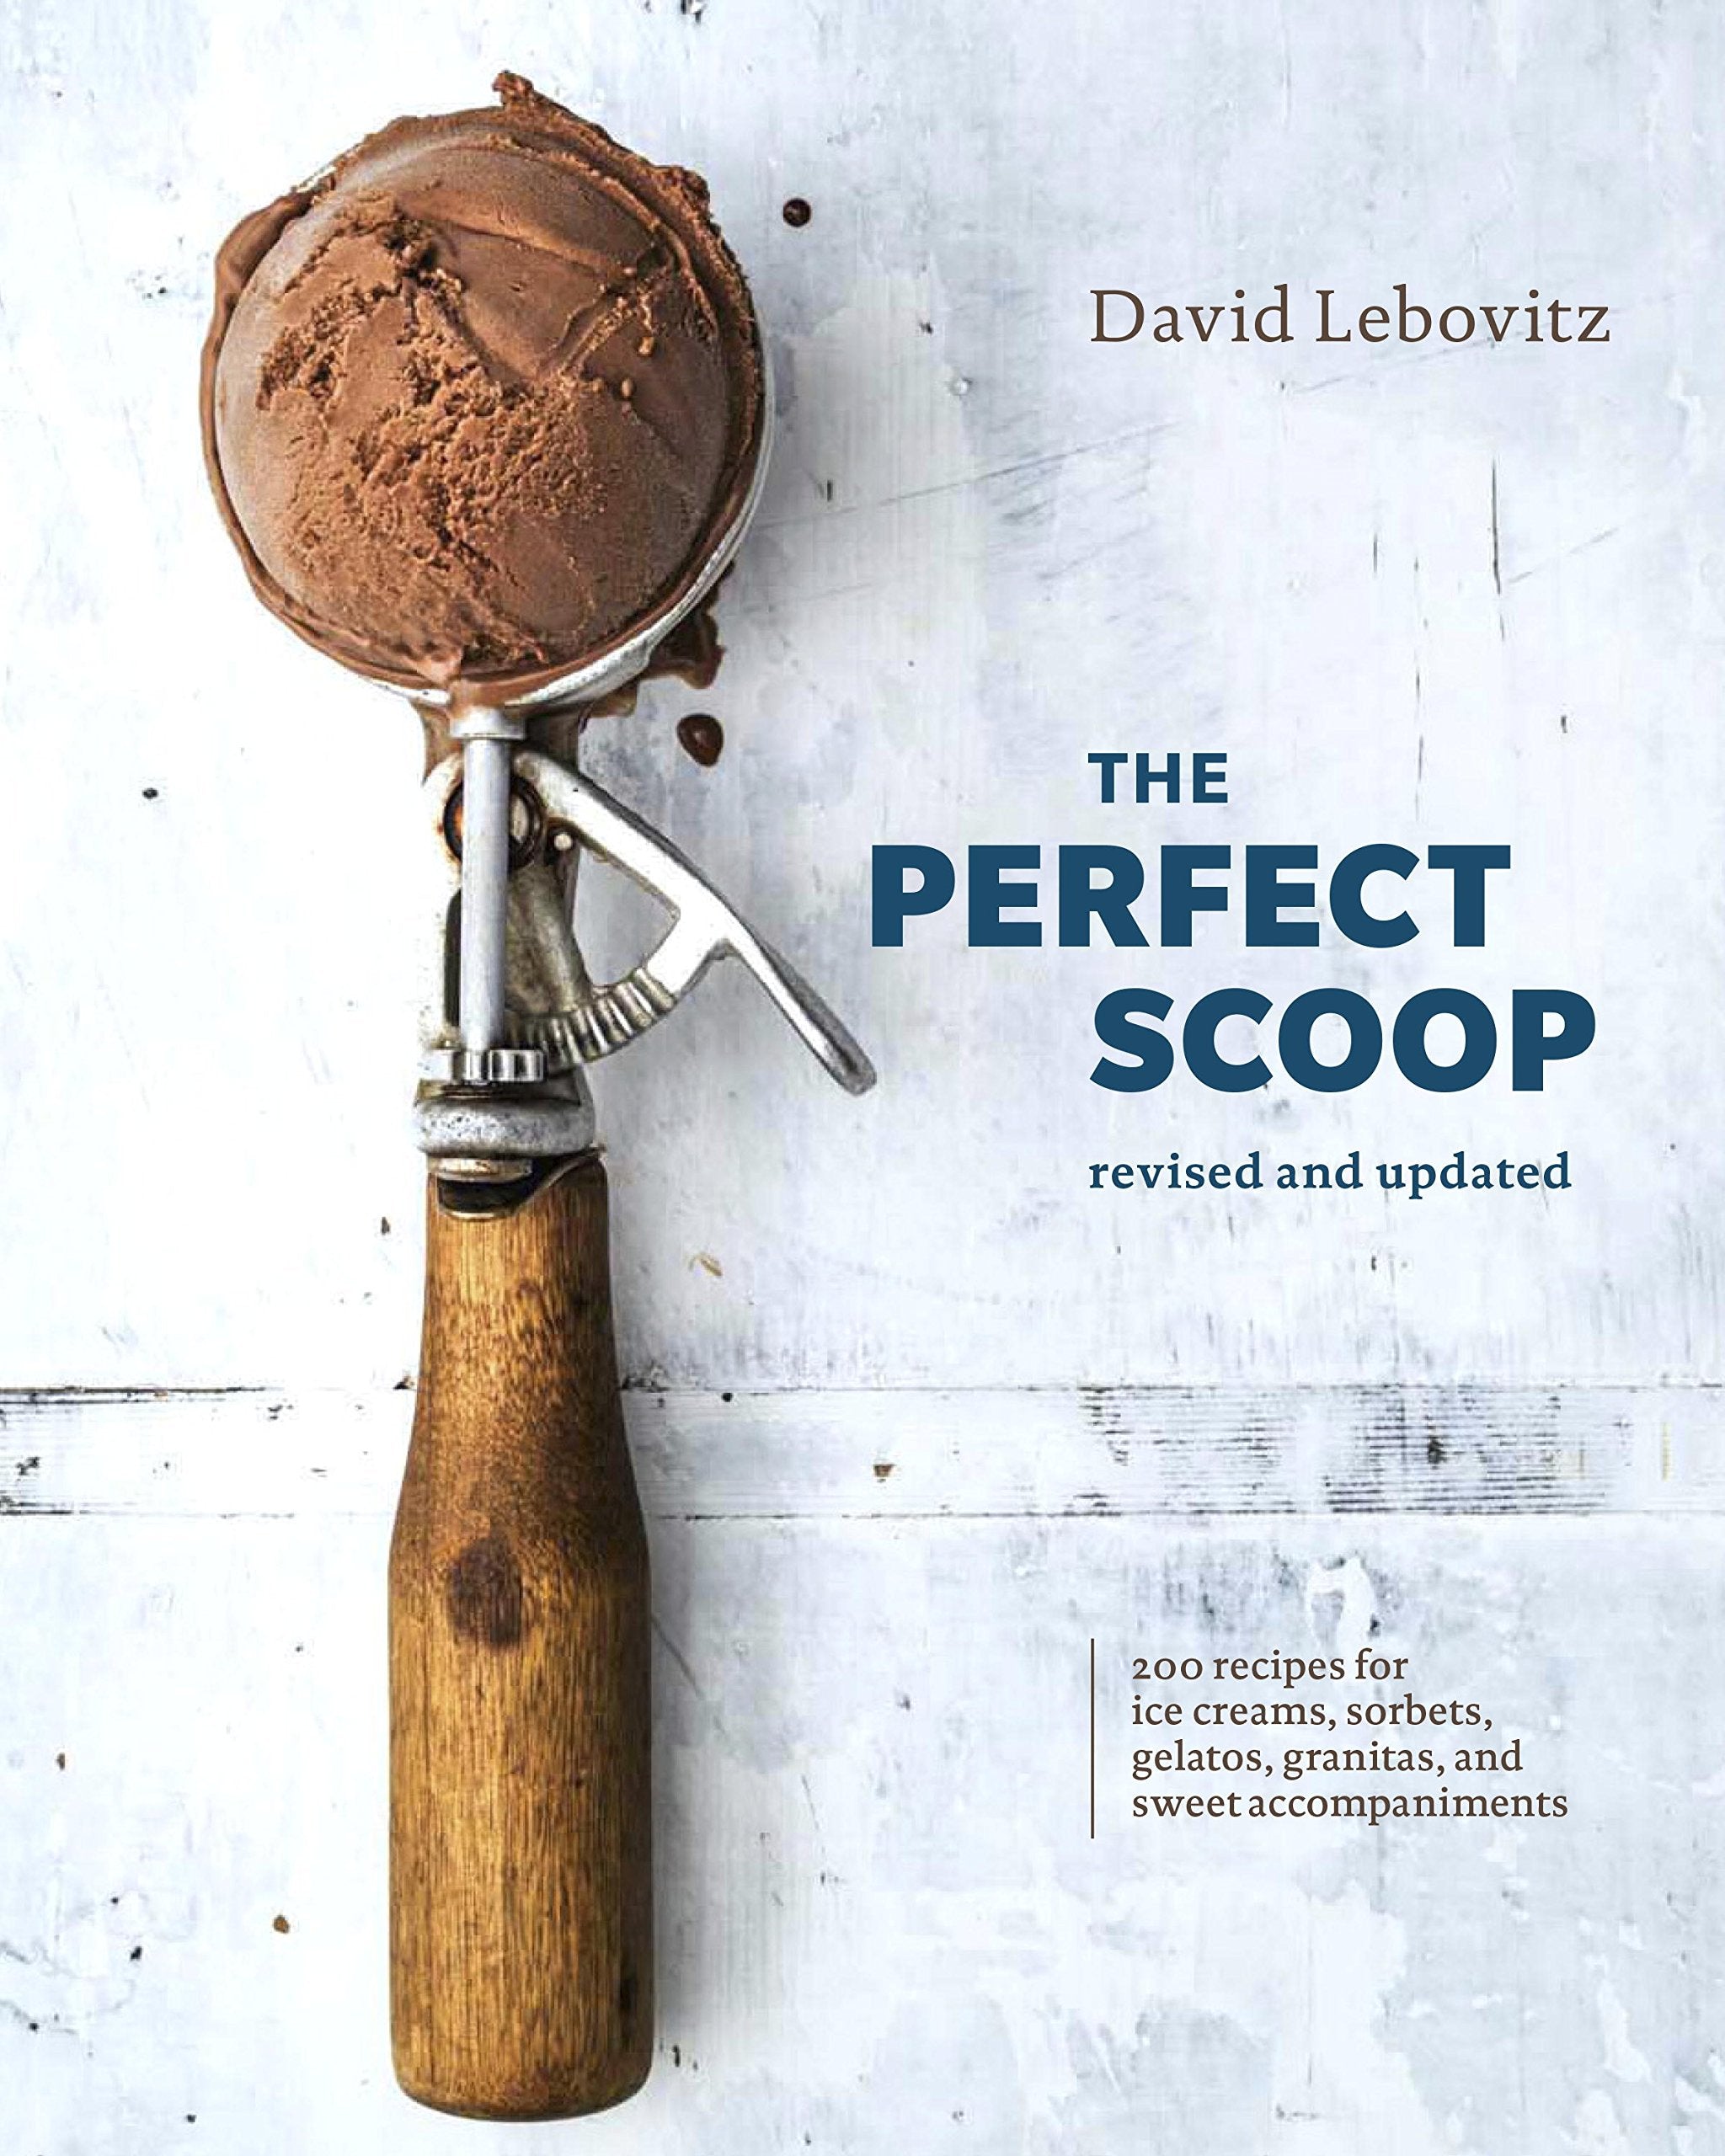 The Perfect Scoop, Revised and Updated: 200 Recipes for Ice Creams, Sorbets, Gelatos, Granitas, and Sweet Accompaniments [A Cookbook] by Lebovitz, David